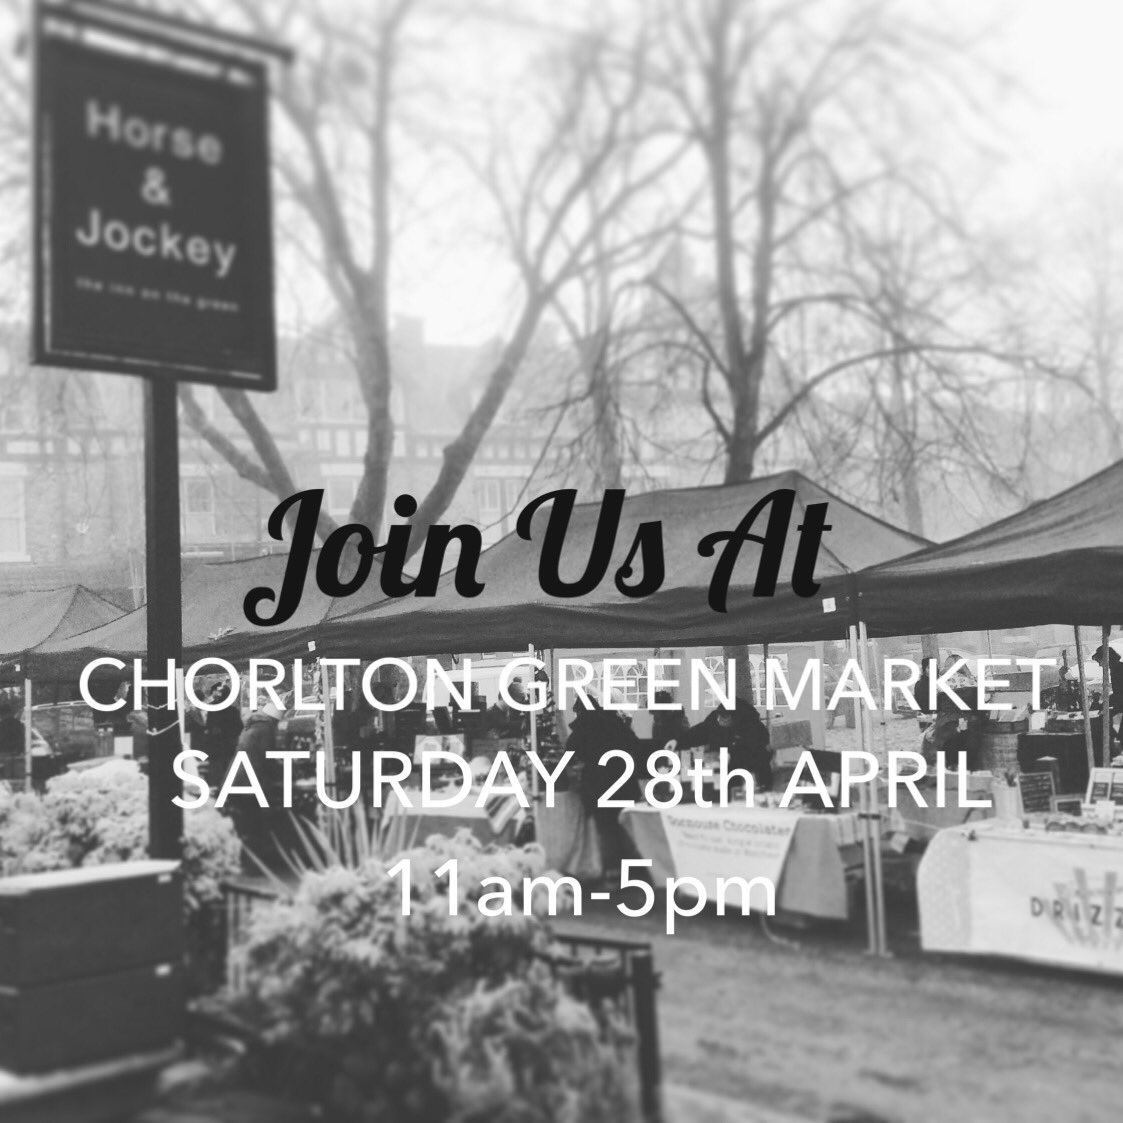 We are at #chorltongreenmarket next Saturday! We’re keeping our 🤞🏼 for good weather, but whatever the weather we’ll be serving up some awesome subs! We’ll be sharing more event dates soon 👀                   #foodmarket #foodie #artisanmarket #suburbansubs